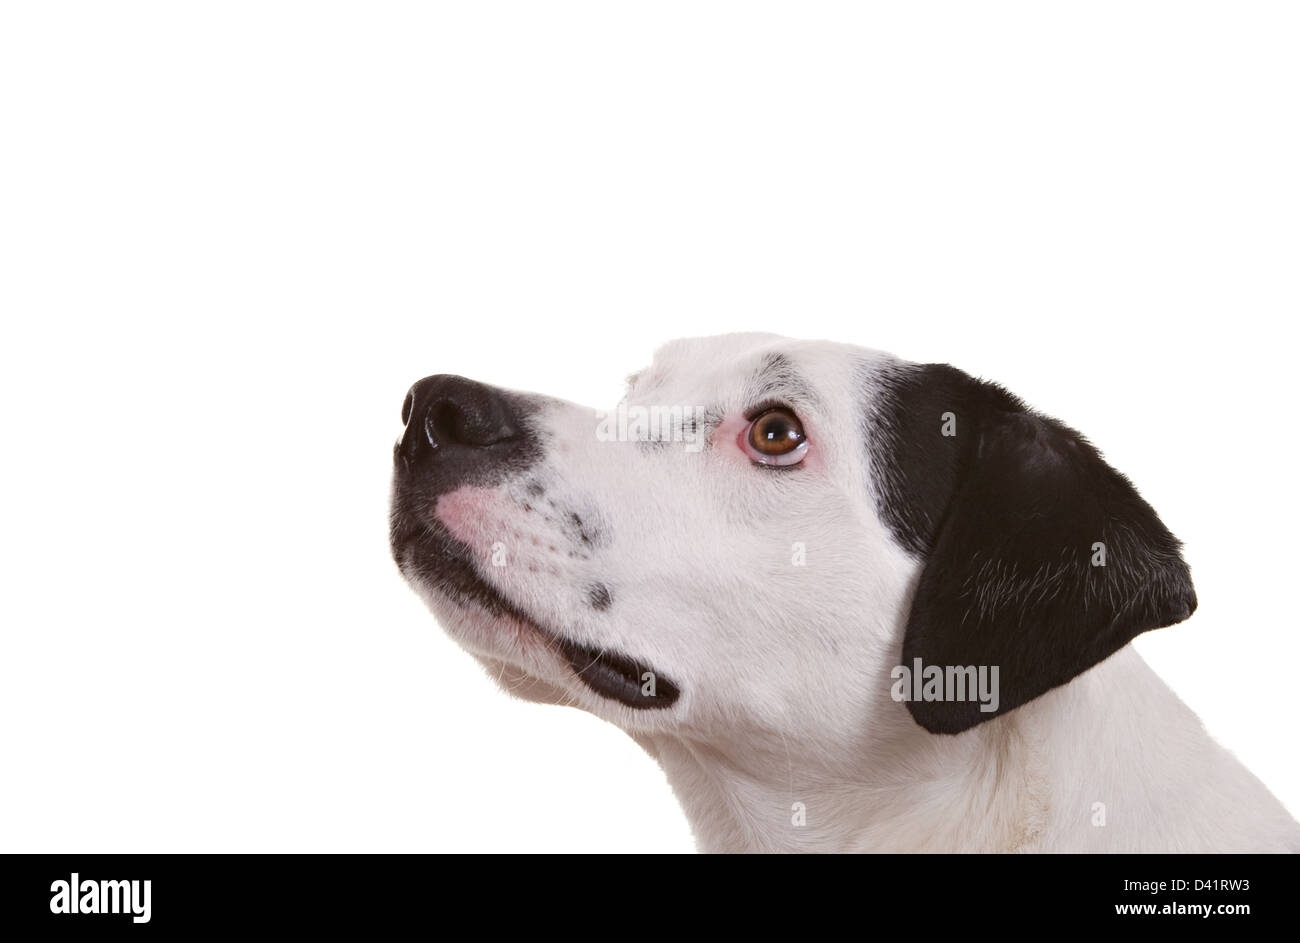 Adult dog on white background with collar and tags Stock Photo